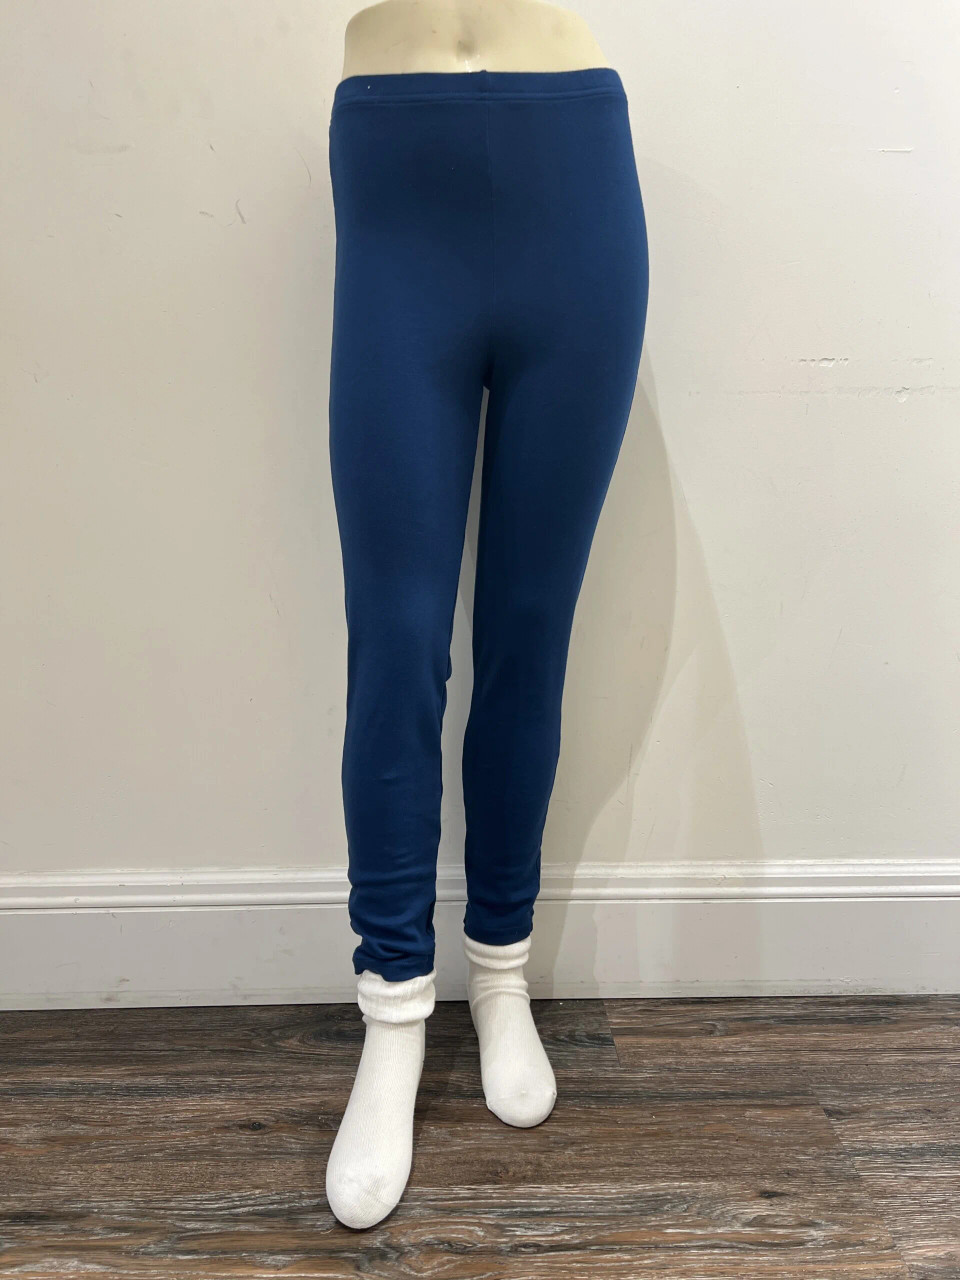 Women's Organic Cotton Leggings | Sustainable Clothing at  SelflessClothes.com